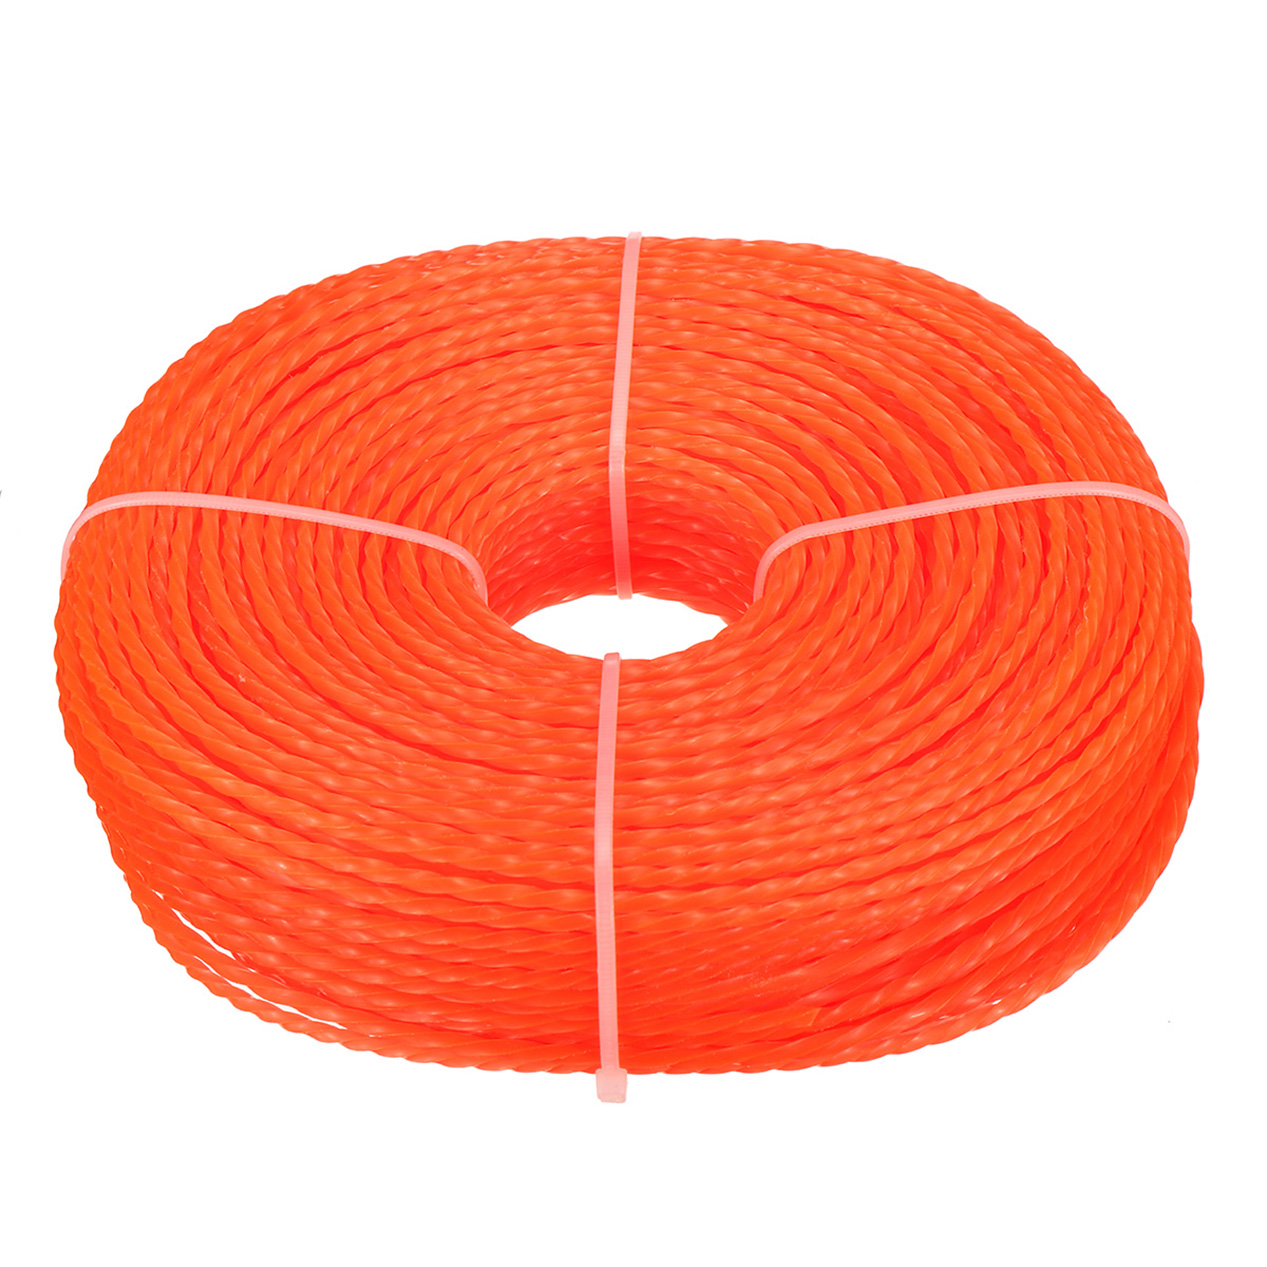 242730-mm-Commercial-Spiral-Twist-Trimmer-Line-Whipper-Snipper-Cord-1790010-6